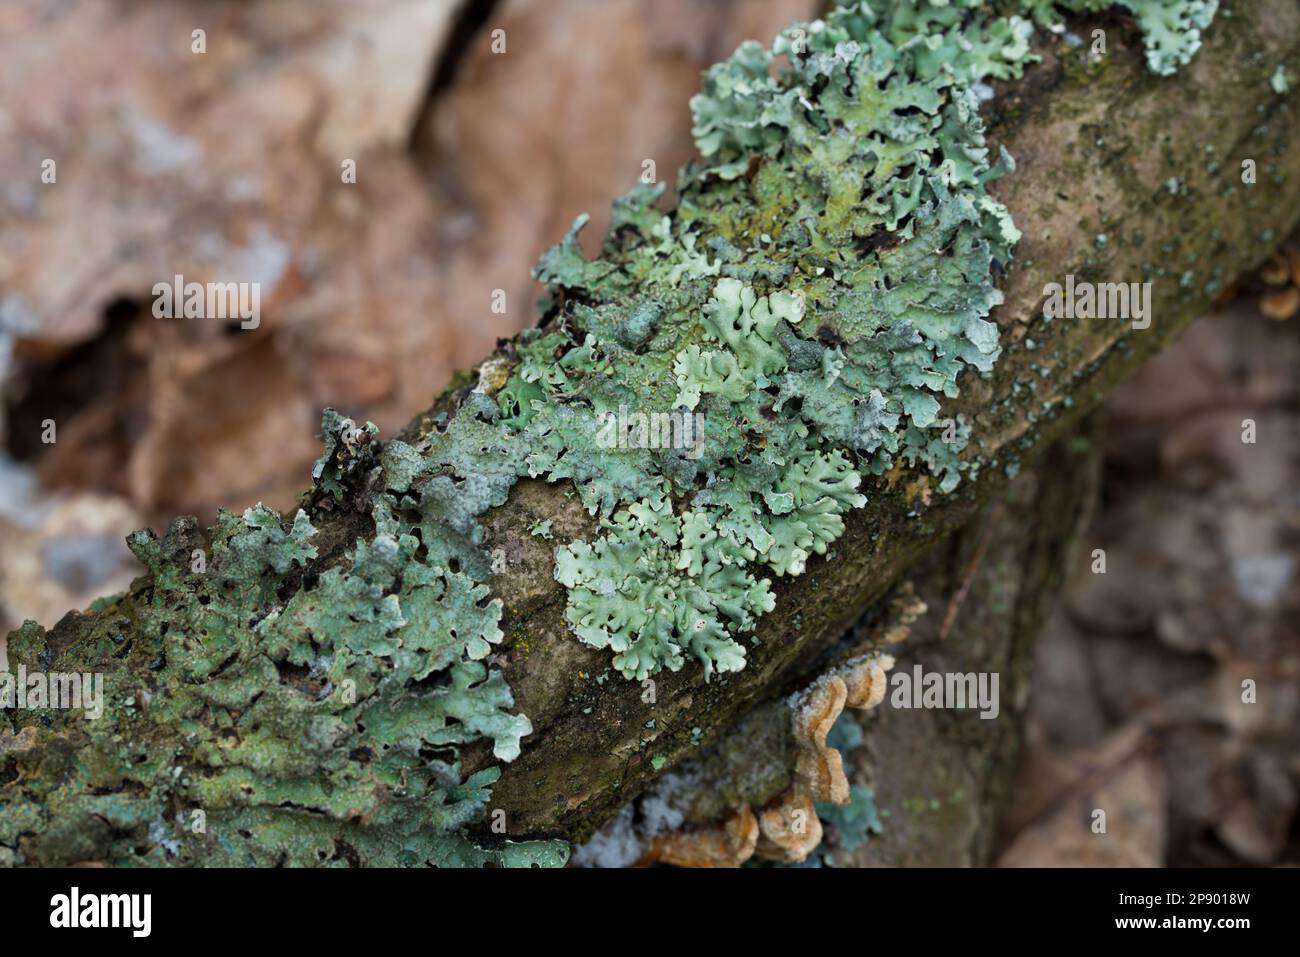 Hypogymnia physodes (monk's-hood lichen) lichen on tree branch in forest closeup selective focus Stock Photo